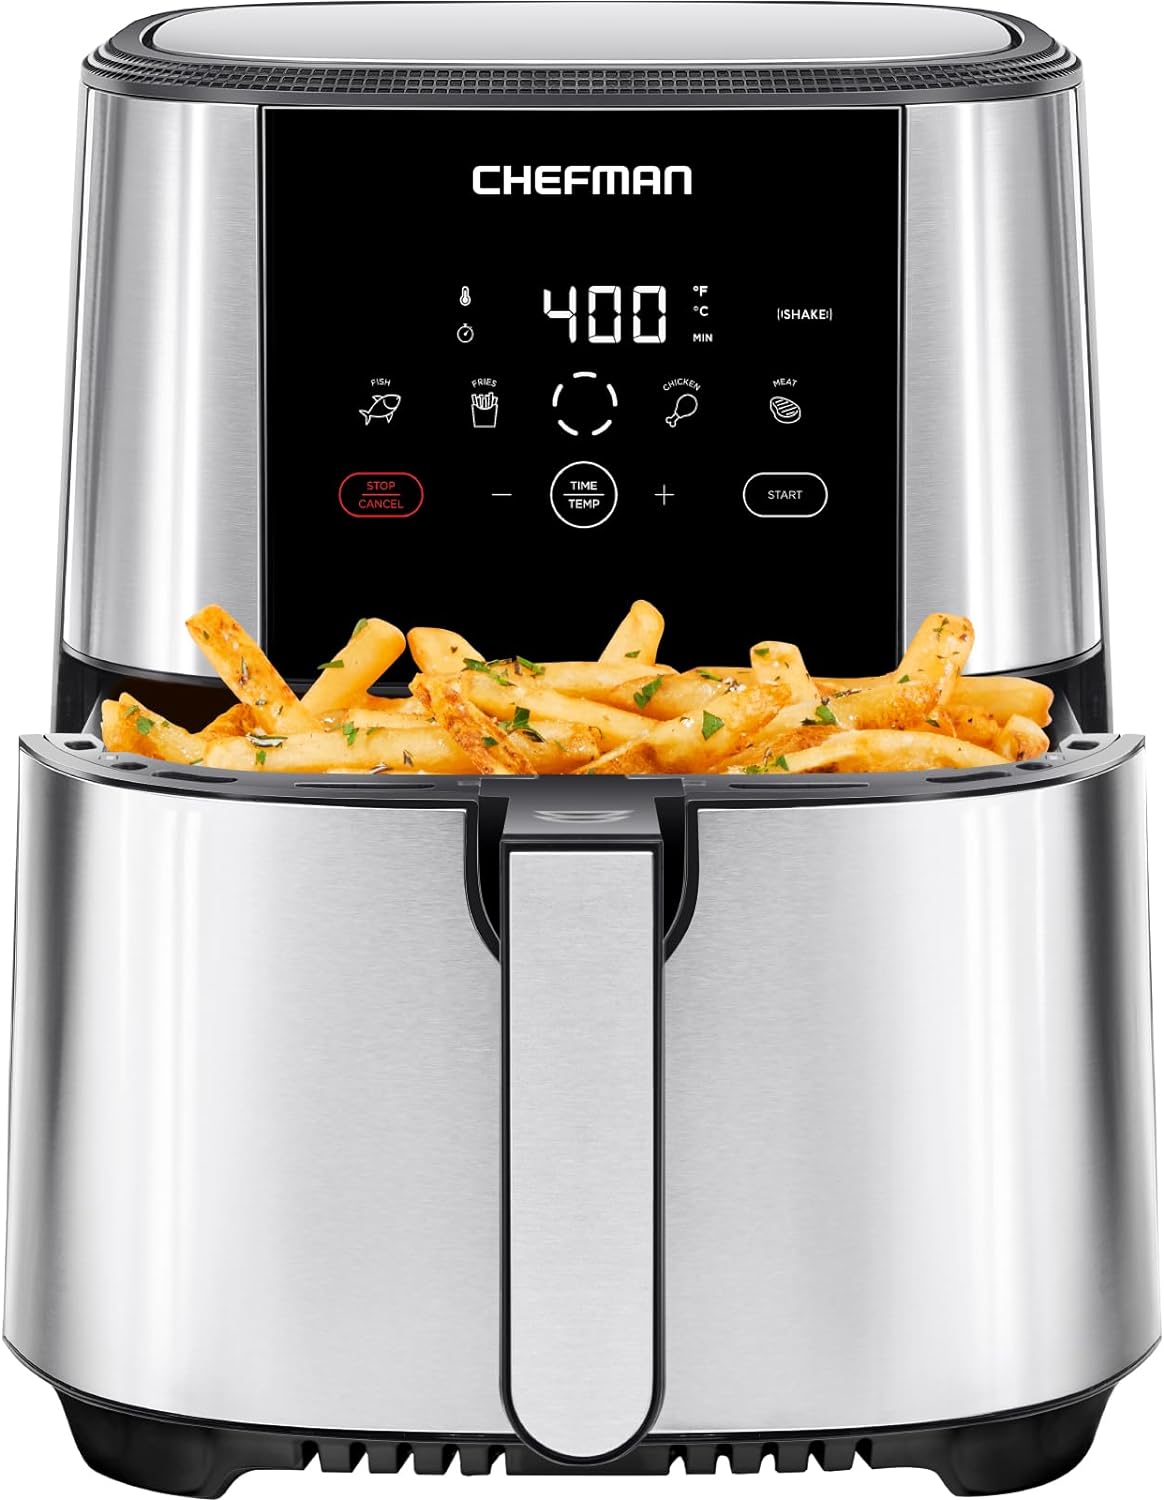 Chefman TurboFry Touch Air Fryer, Large 5-Quart Family Size